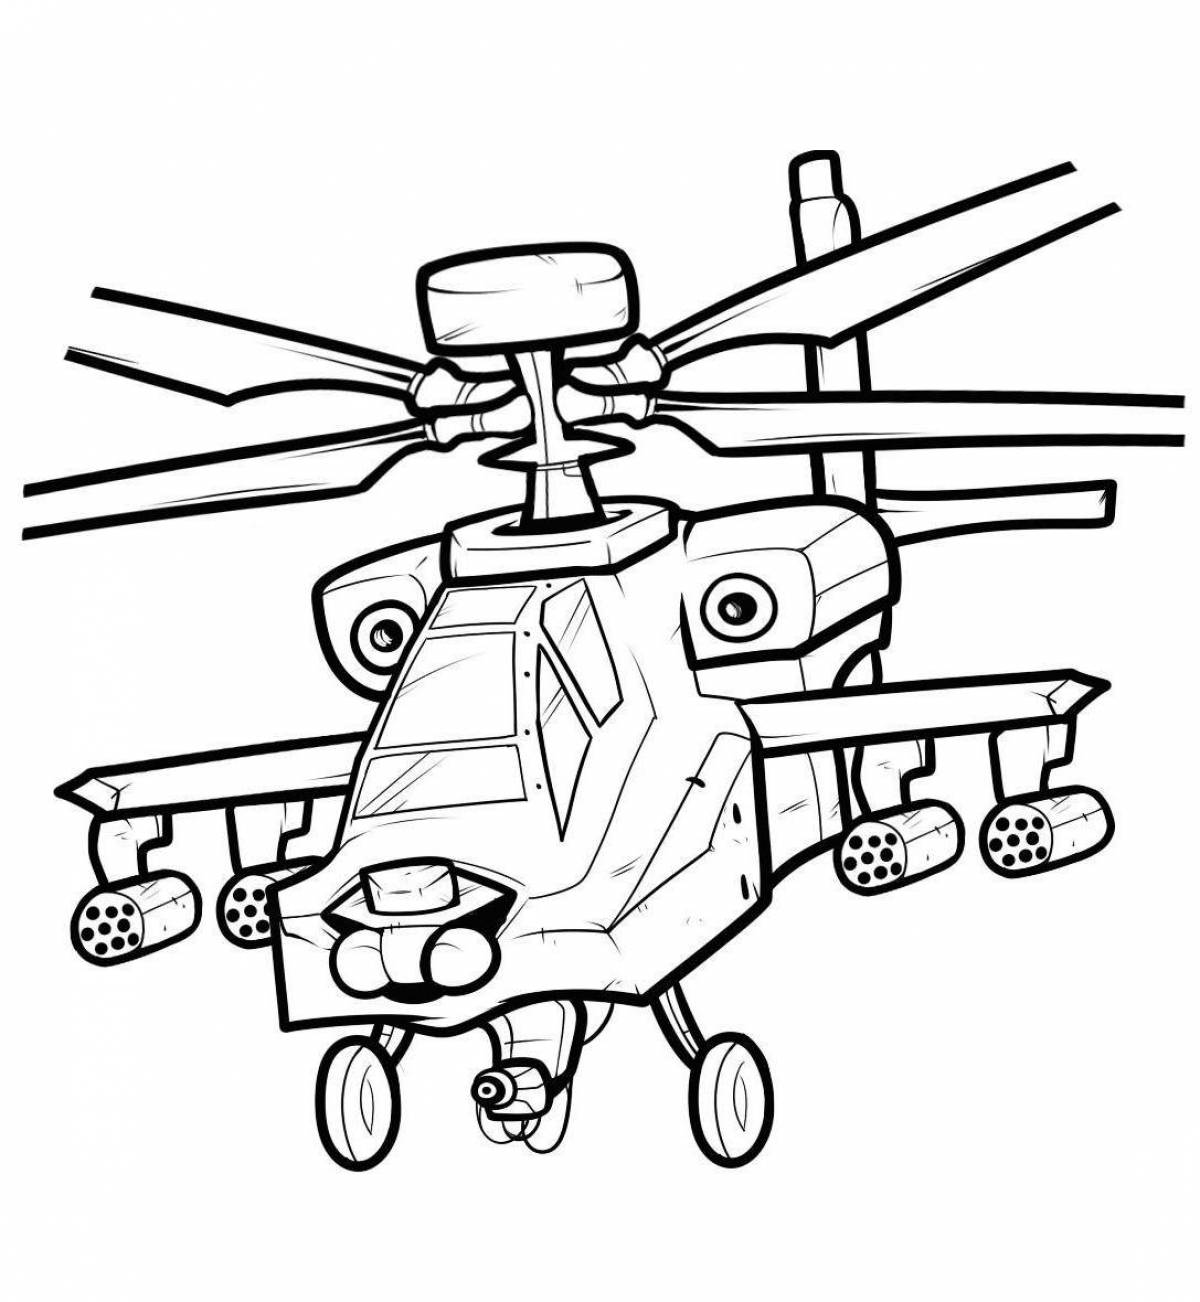 Outstanding helicopter coloring page for kids